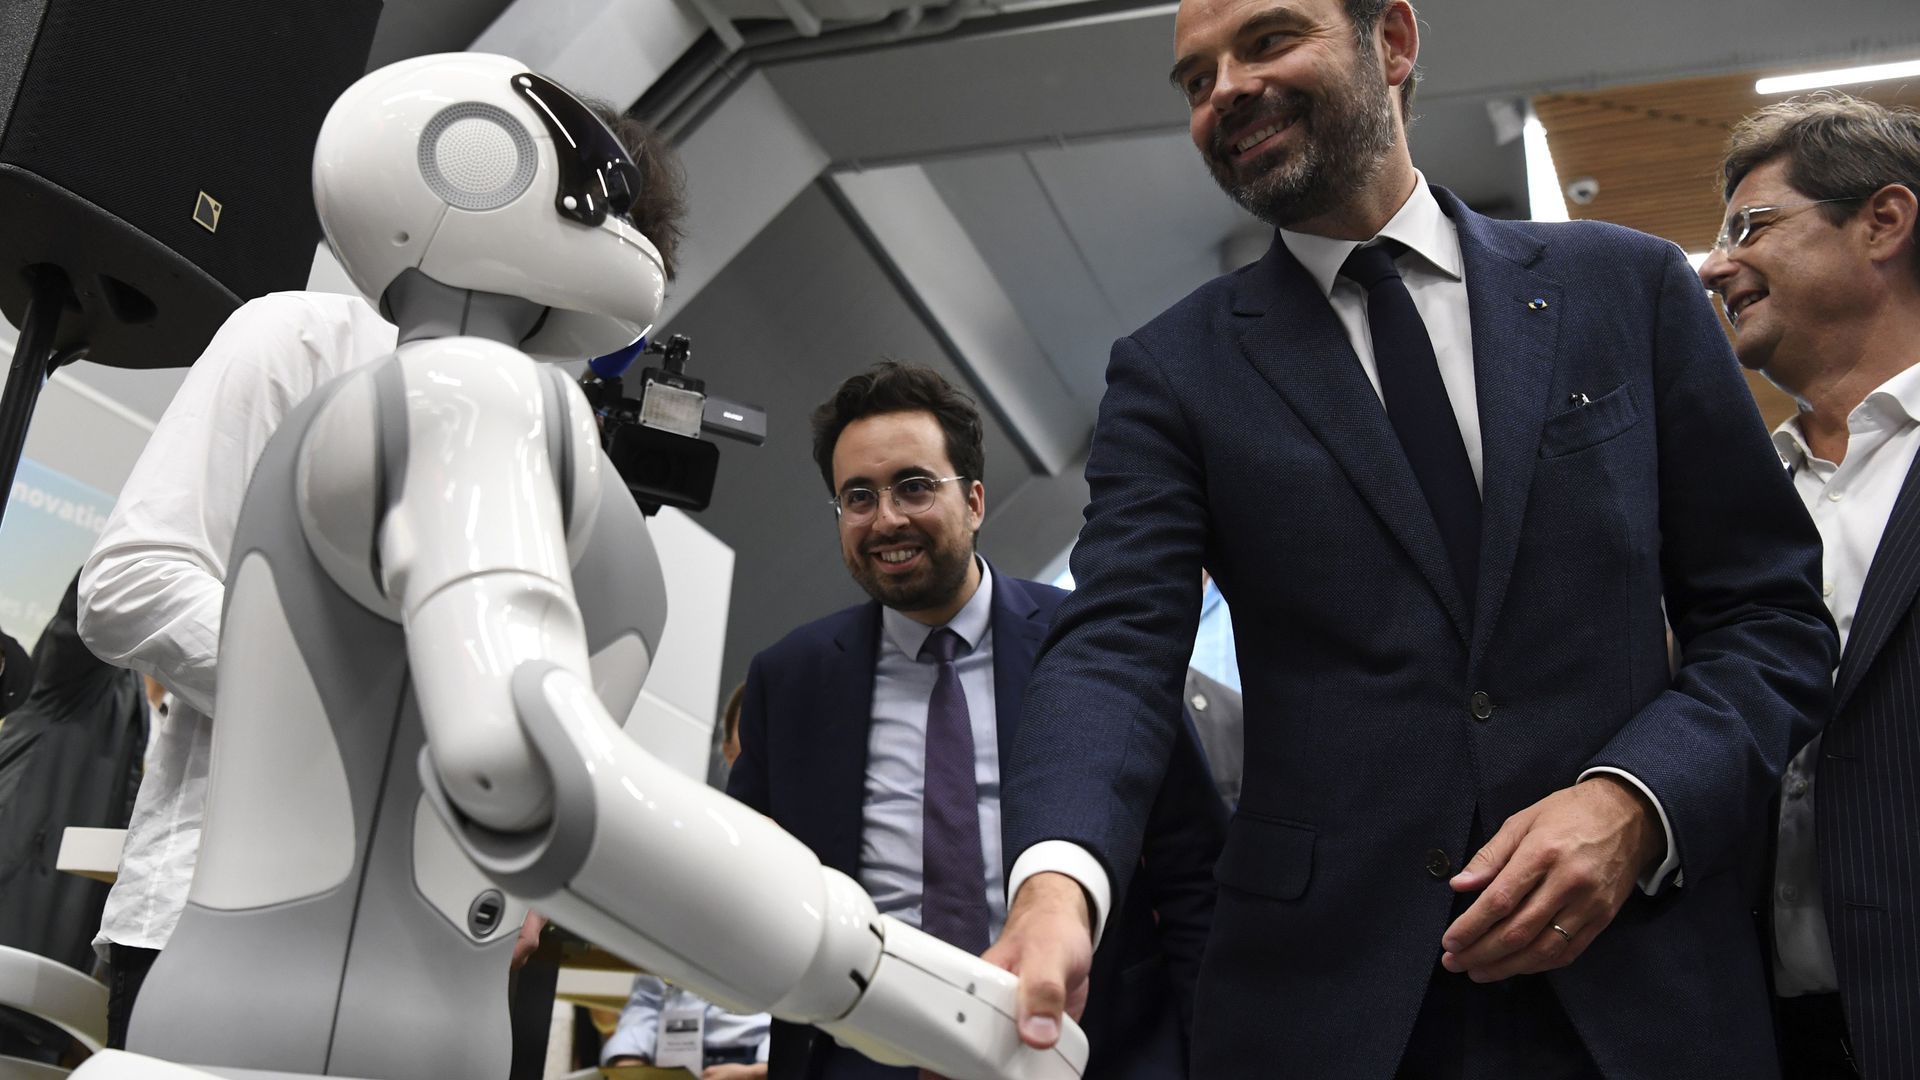 Robot shaking hands with person